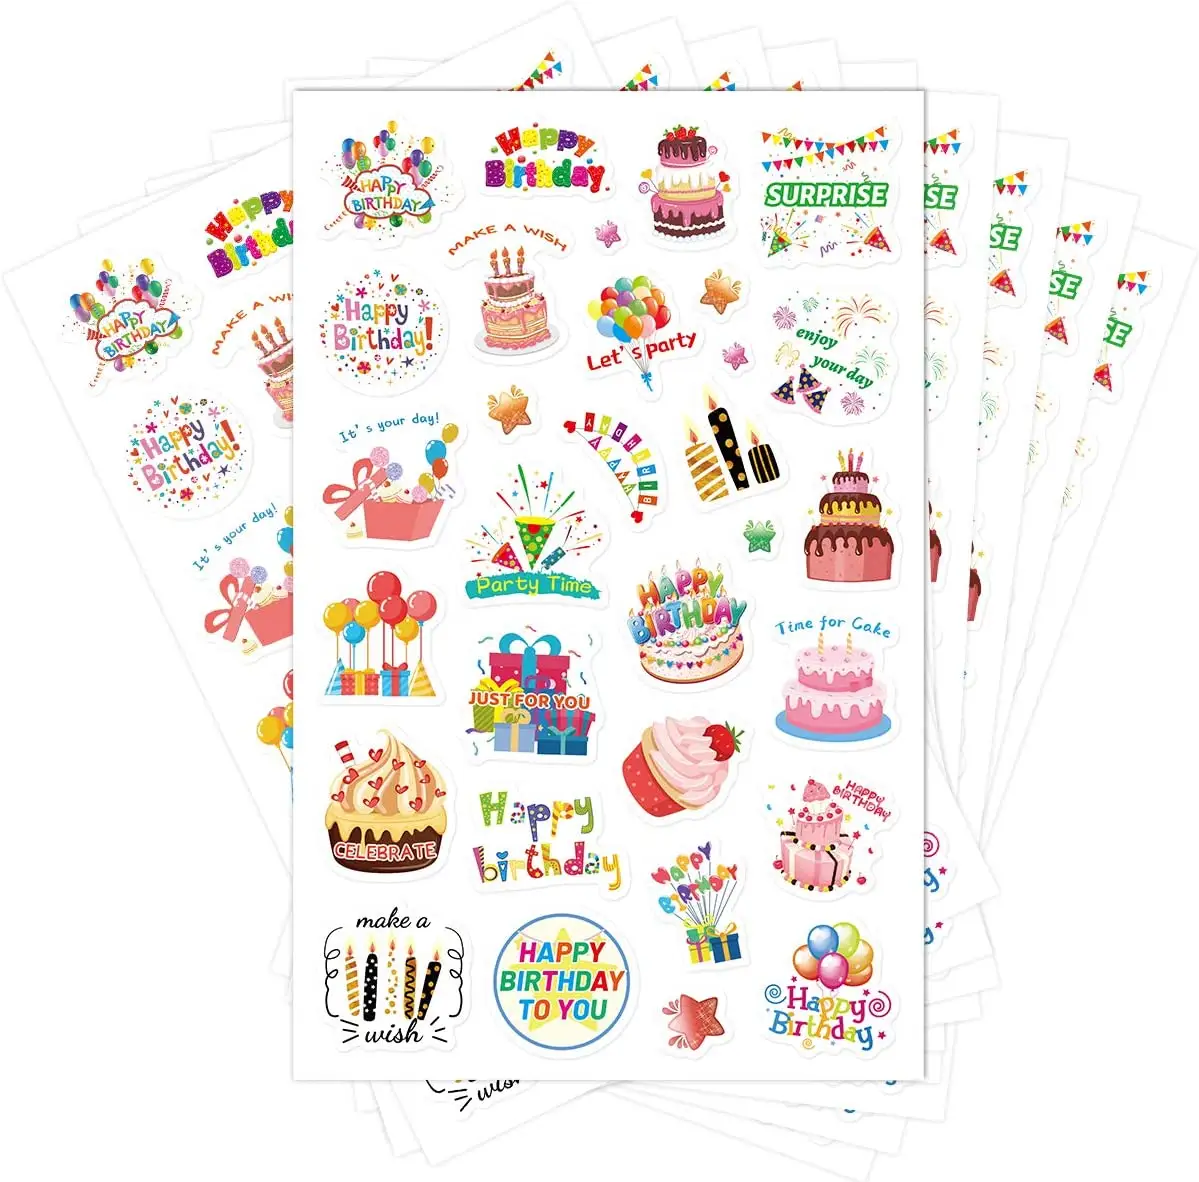 Happy birthday stickers for Kids Adhesive sticker party gifts envelope sealing Gift wrap decorations cake topper decorations